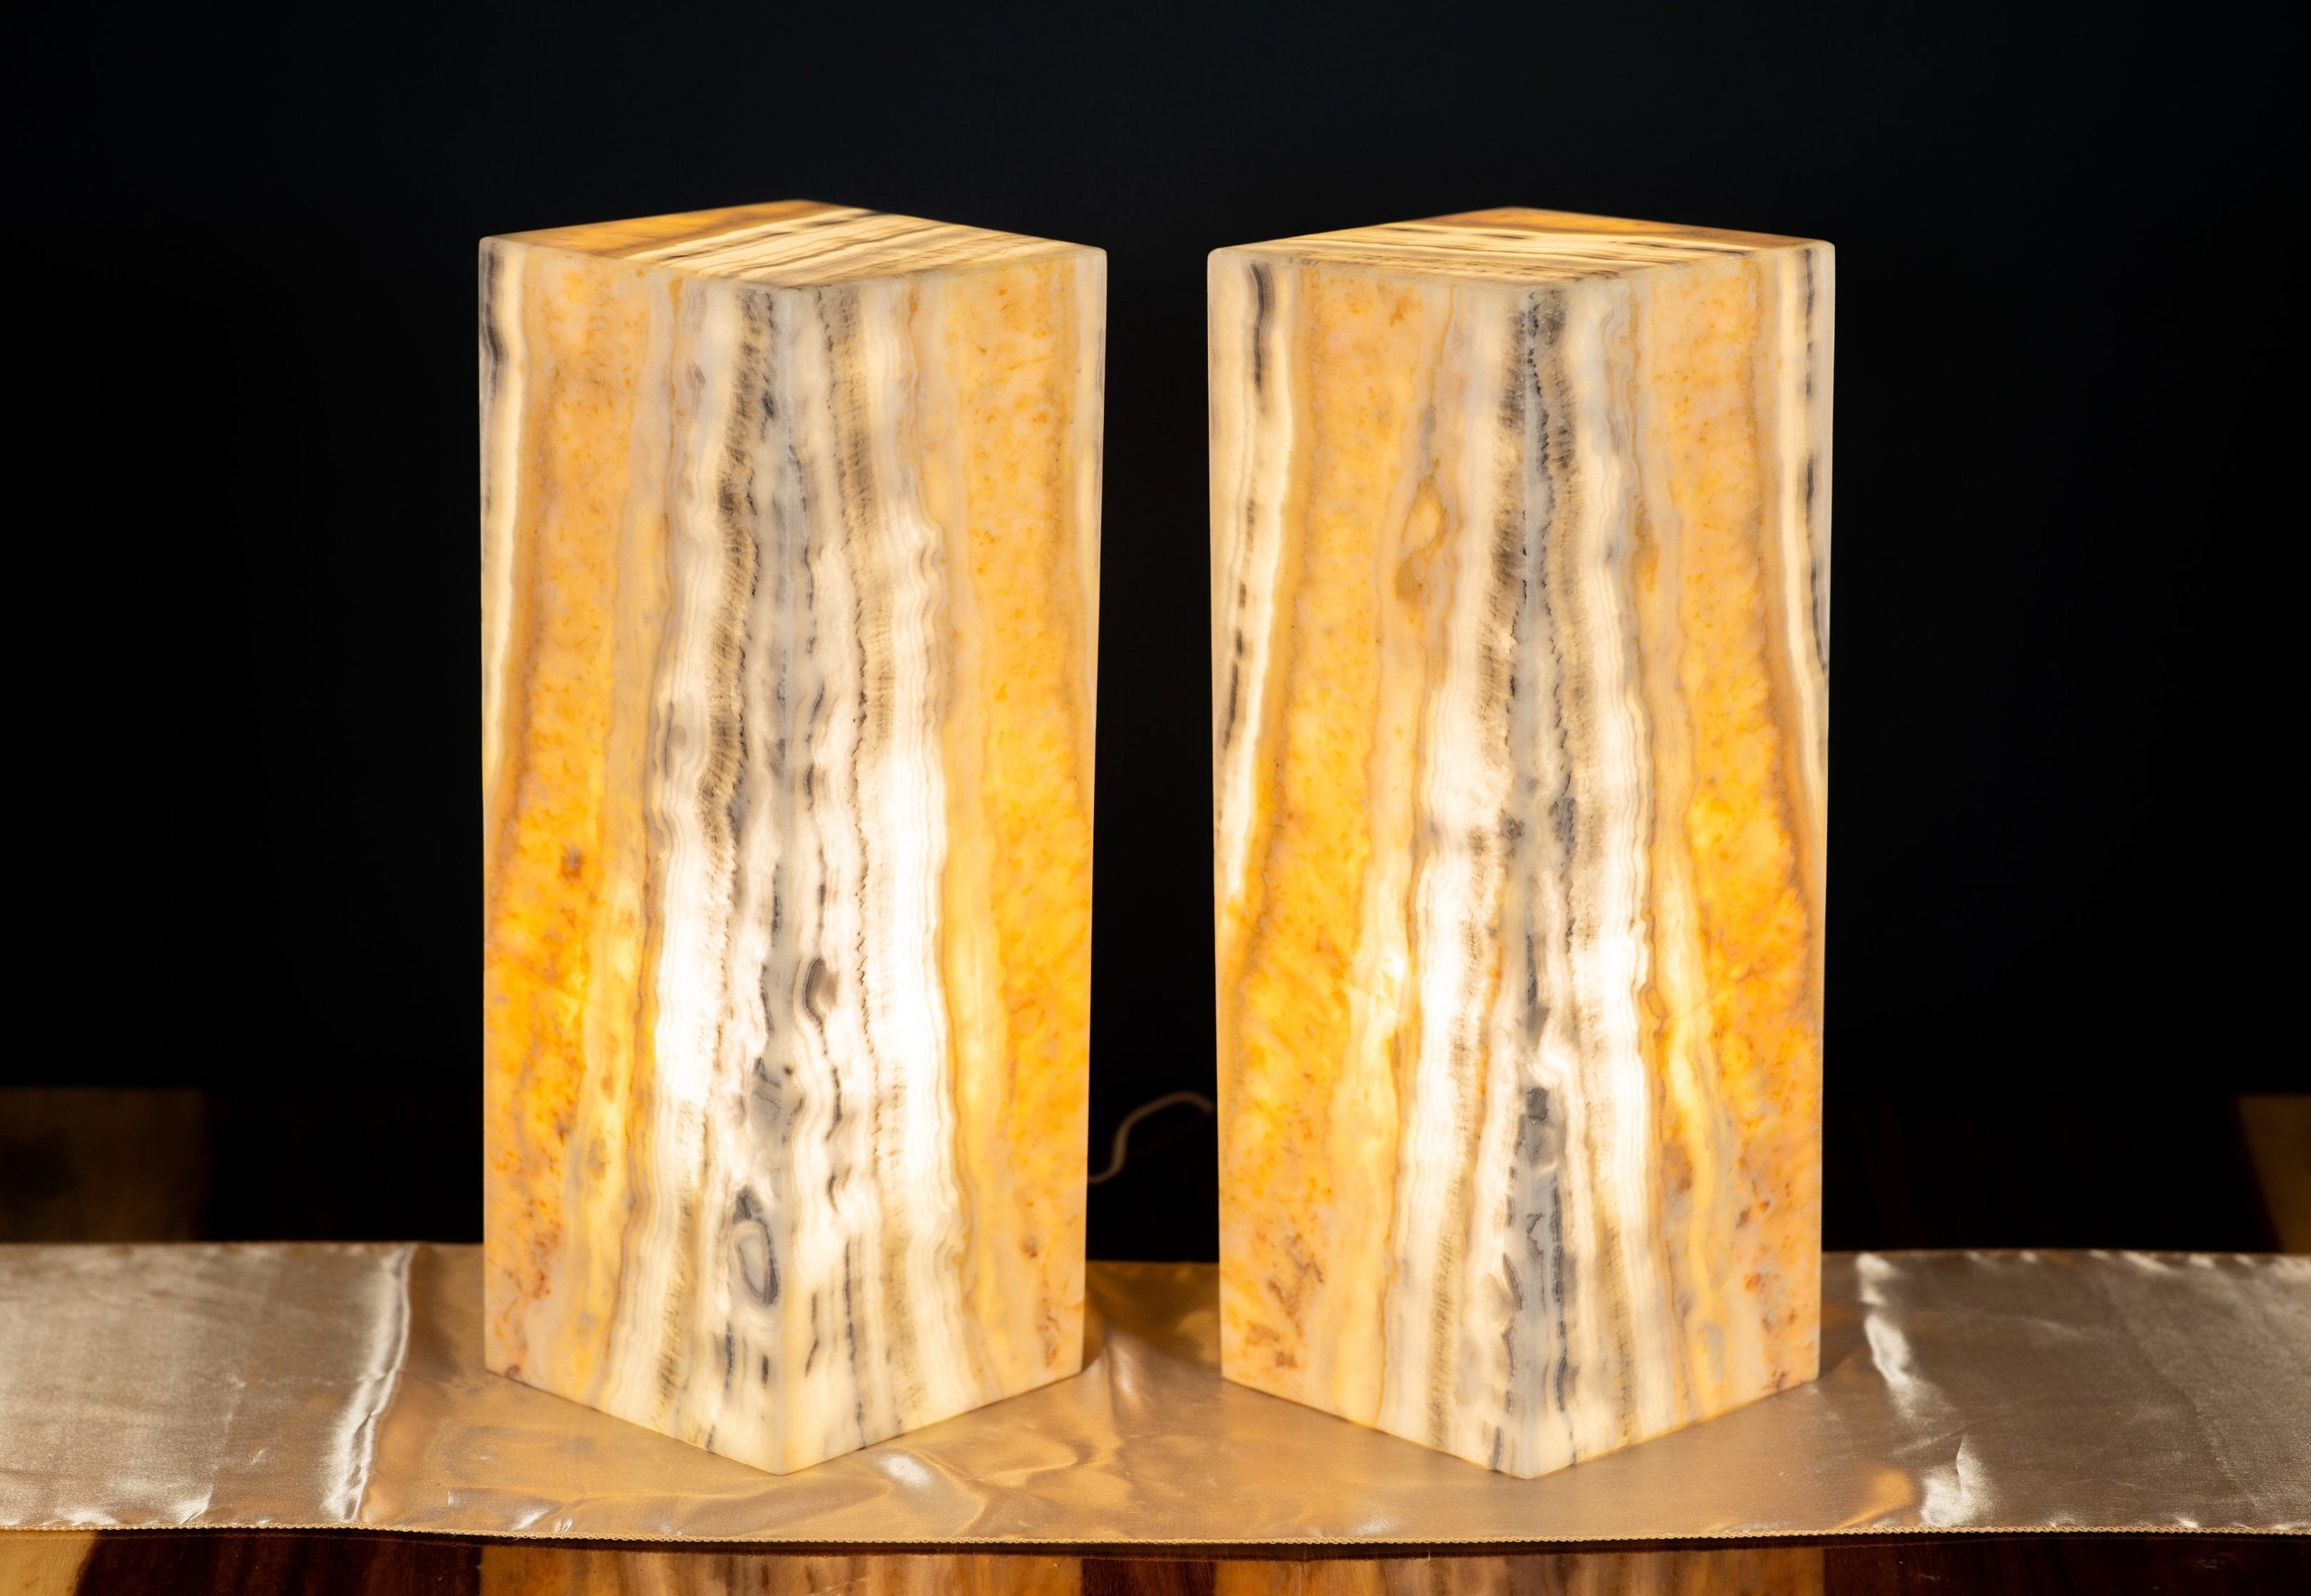 Silver & Gold Onyx Lamp - One of a Kind - 16 Inches - Lamp Set - Bedside Lamps